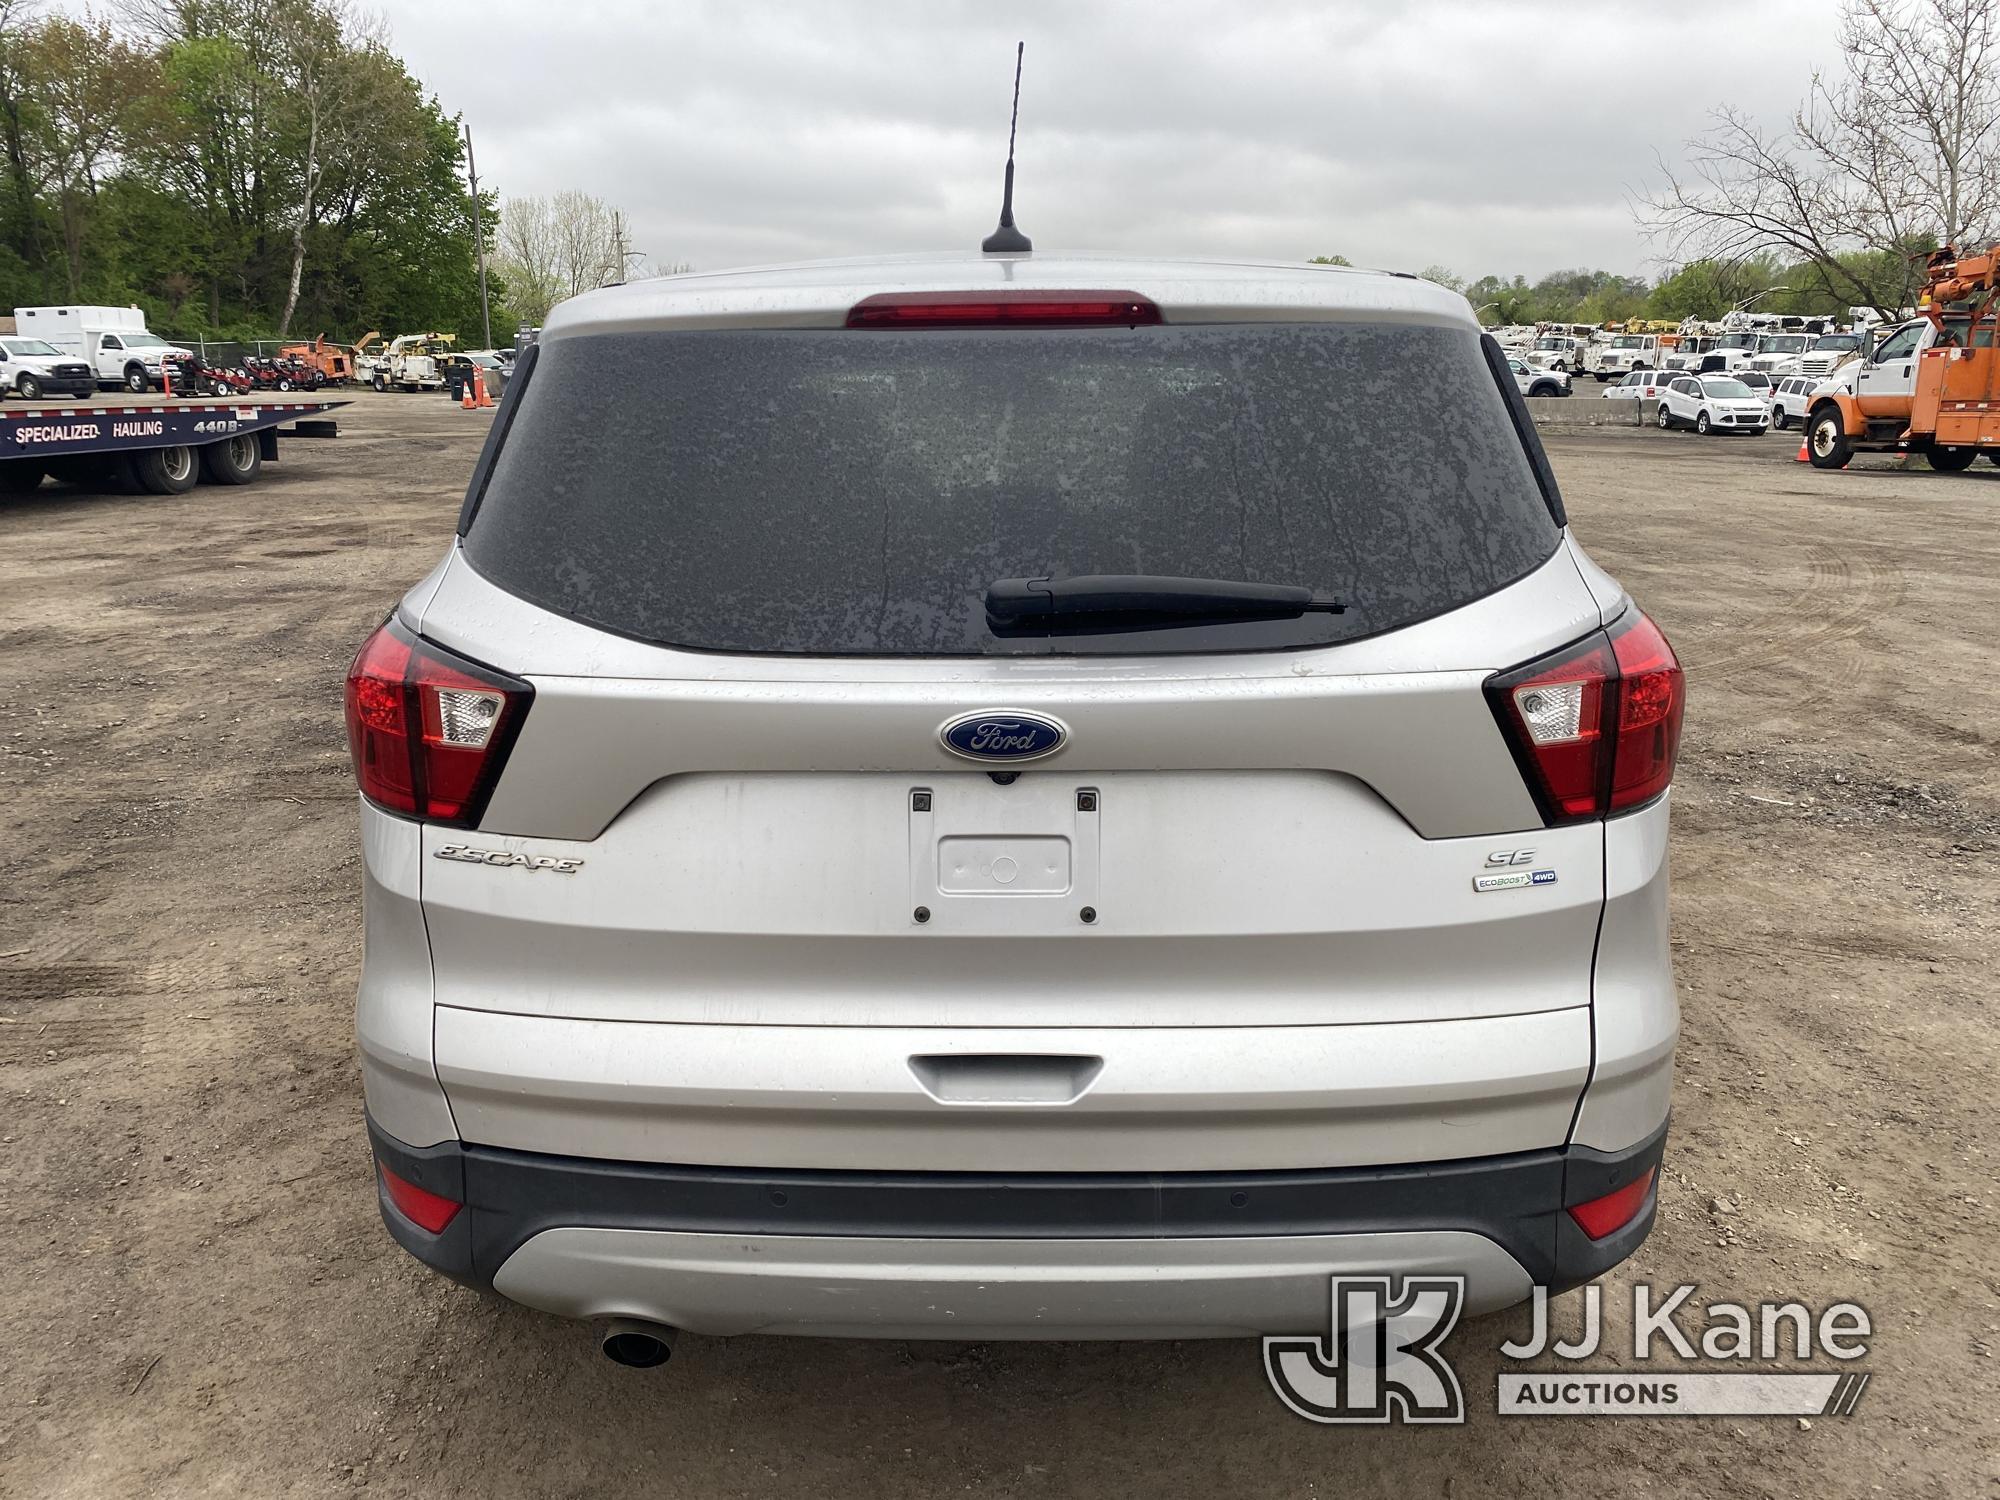 (Plymouth Meeting, PA) 2019 Ford Escape 4x4 4-Door Sport Utility Vehicle Runs & Moves, Body & Rust D